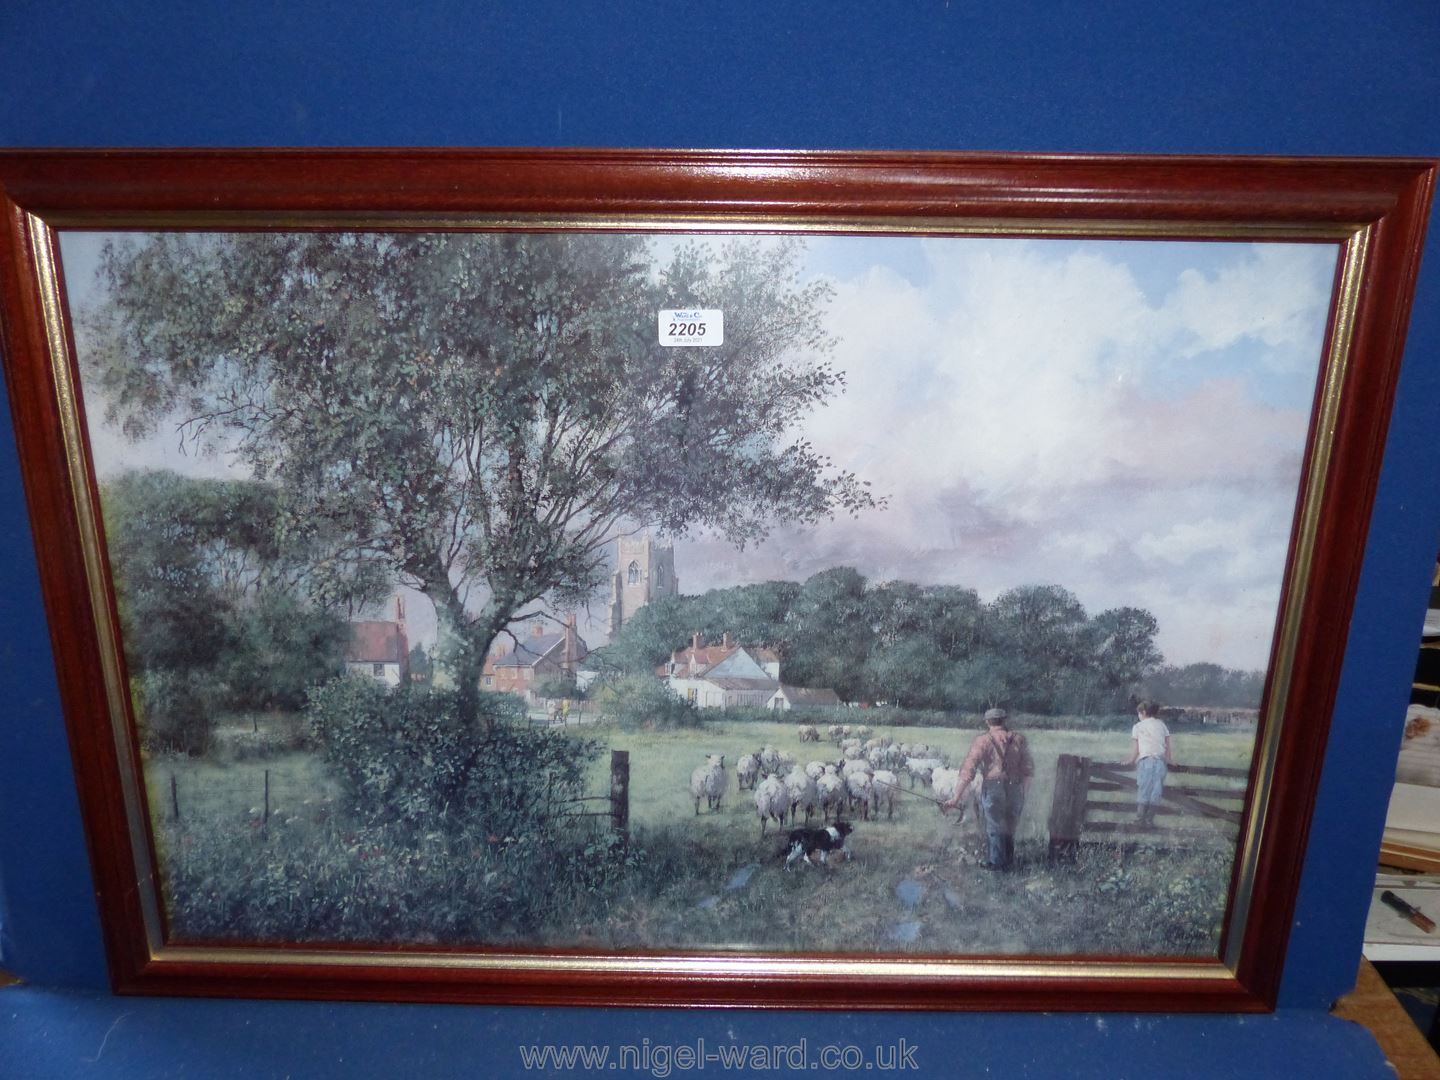 A large print depicting a village scene with farmer driving sheep through to the next field with a